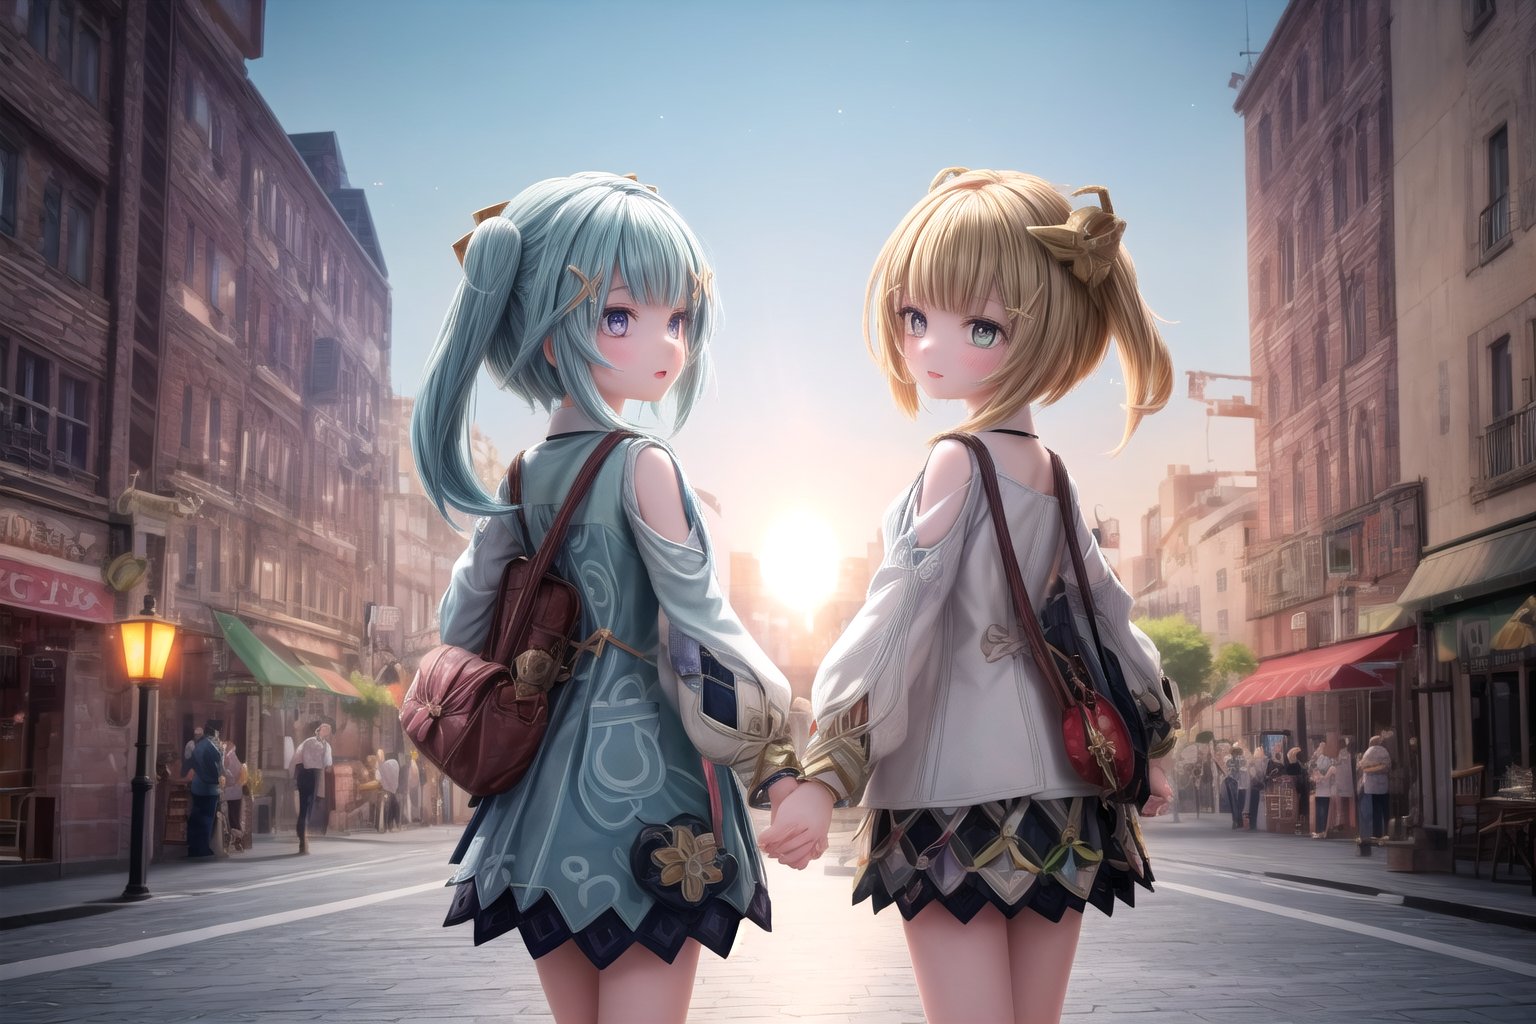 Here is a prompt for an image:

FaruzanRnD and Yaoyaodef, two sisters who have been through ups and downs together, stand hand in hand in the vibrant city of Lyiue from Genshin Impact. The sun sets behind them, casting a warm orange glow on the intricate architecture of the ancient buildings, with deep shadows adding depth and complexity to the scene. The sisters' faces are lit by the soft golden light, their eyes shining with warmth and affection as they share a moment of triumph. In the background, the city's bustling streets come alive with people going about their daily lives, while the sky above is painted with hues of pink and purple, signaling the end of another day in this breathtaking metropolis.